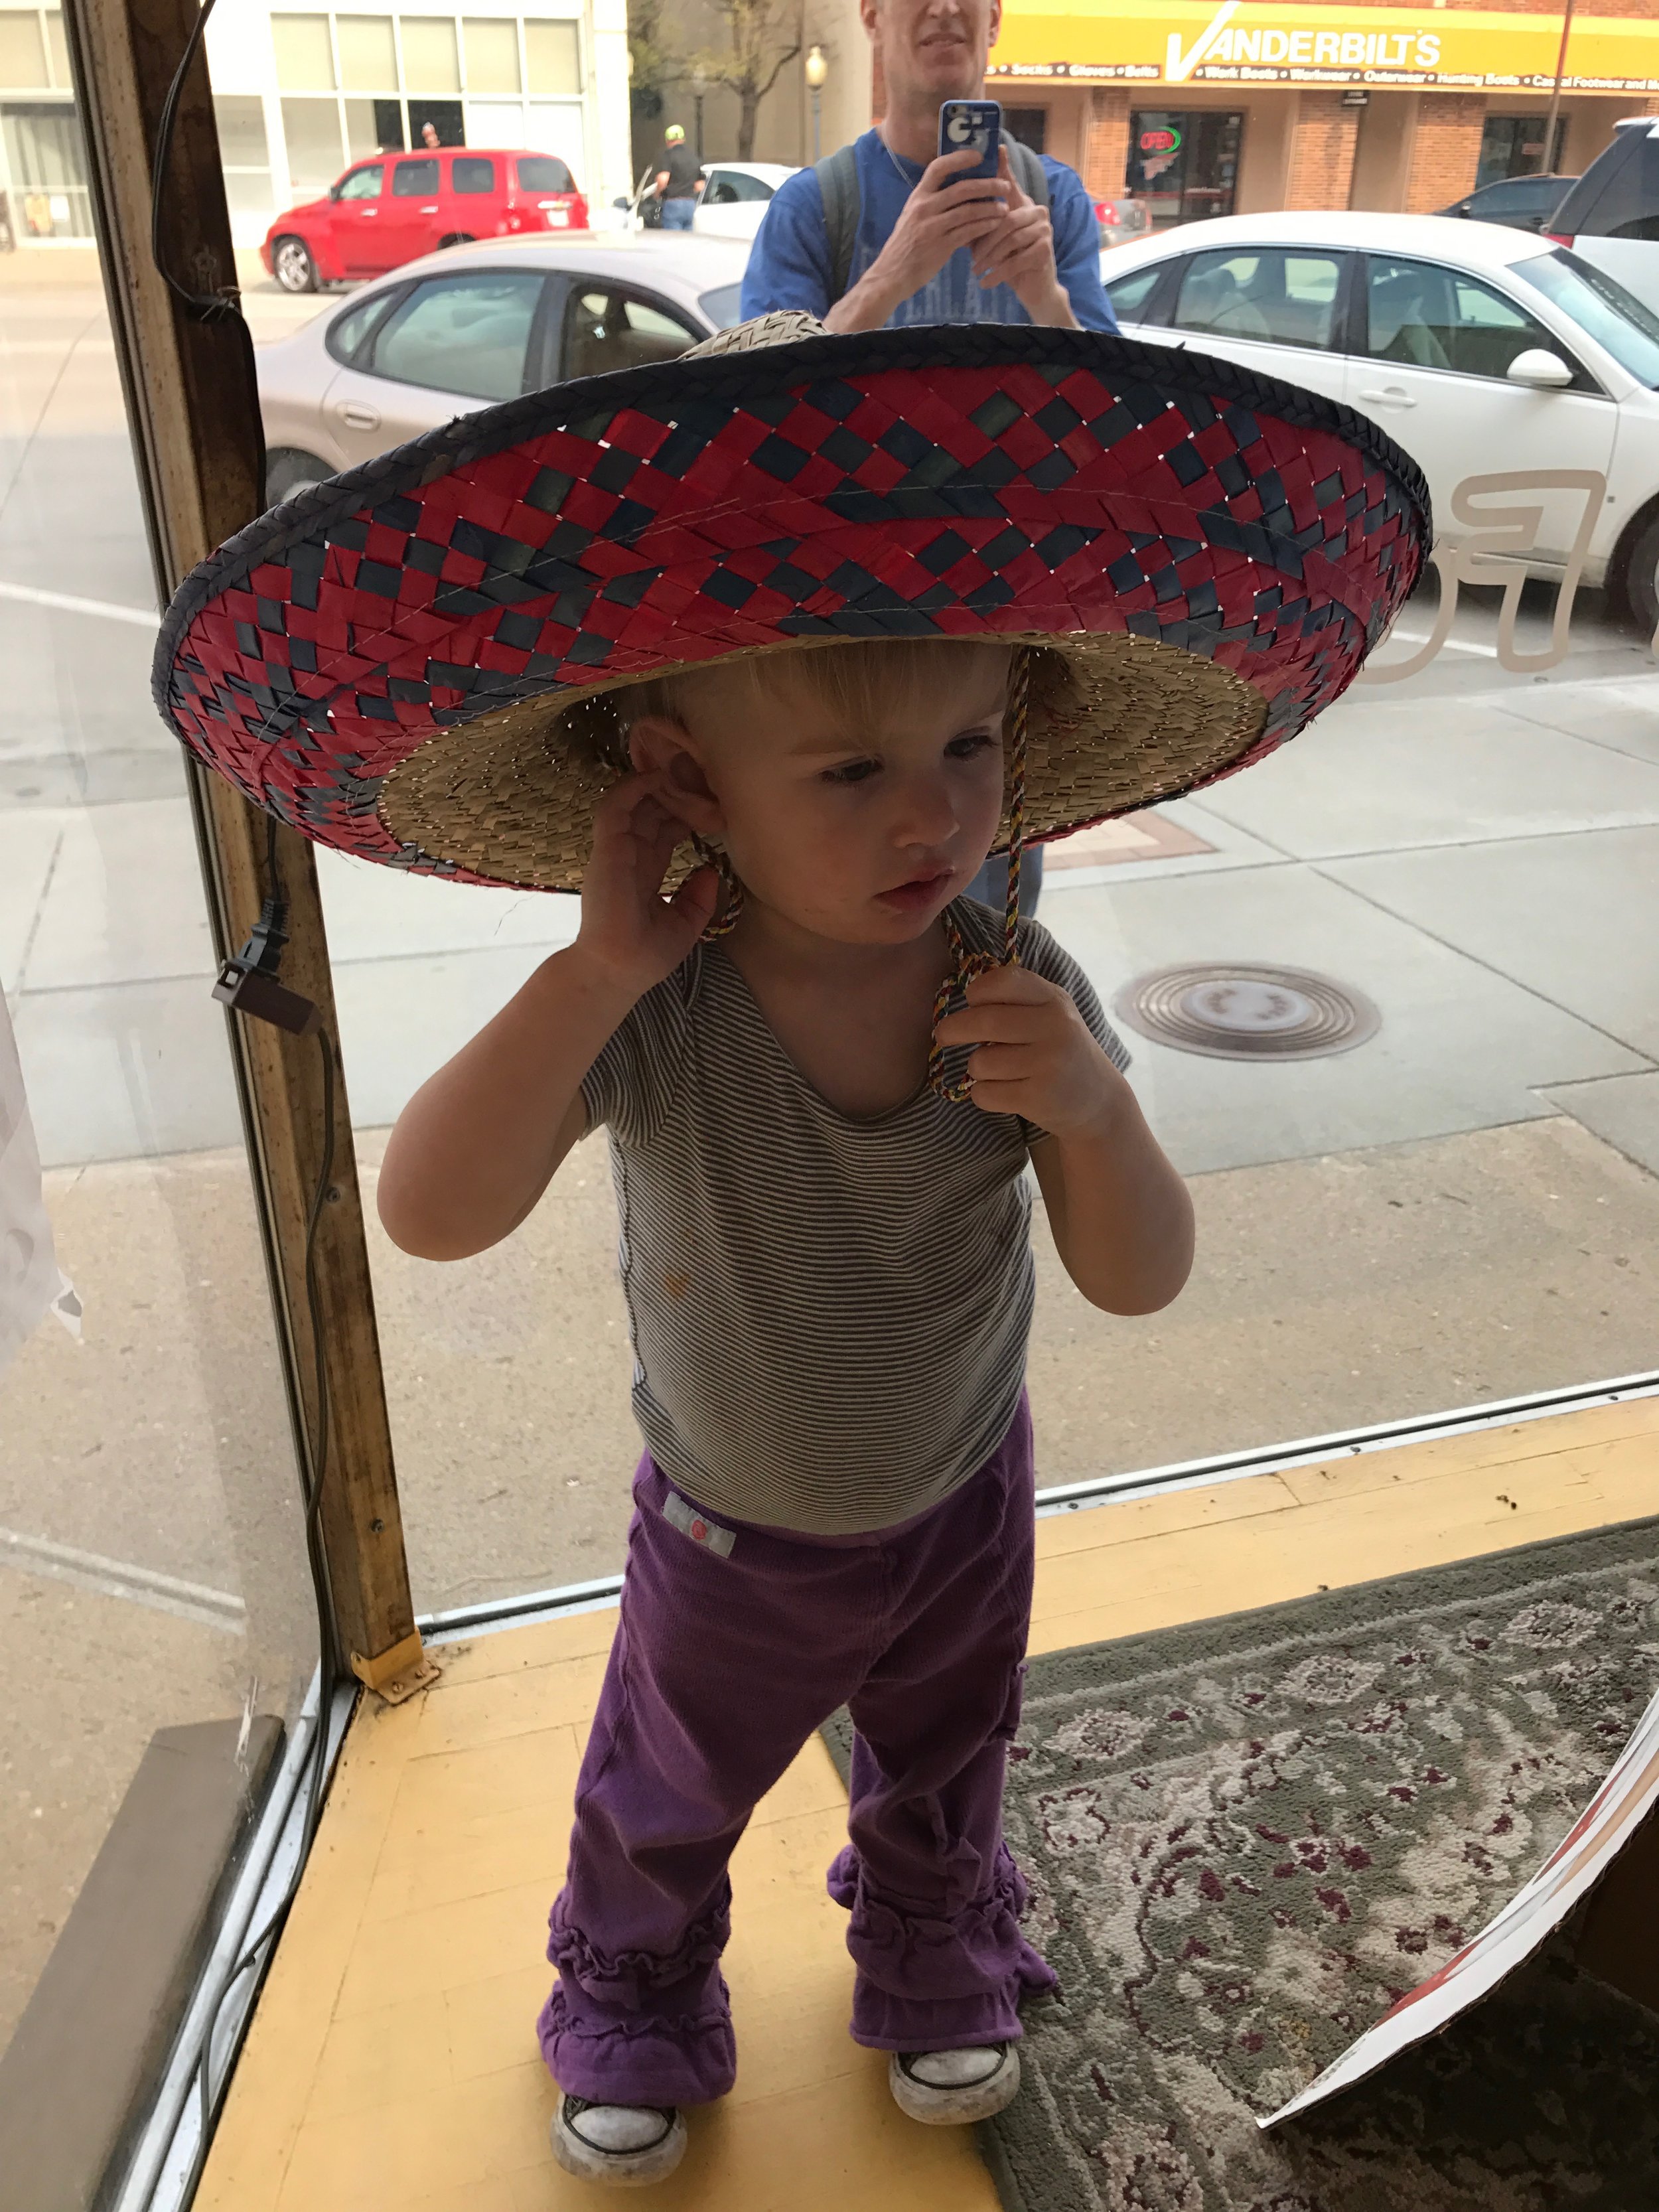   As I said, she loves to climb. And try on hats in windows.  